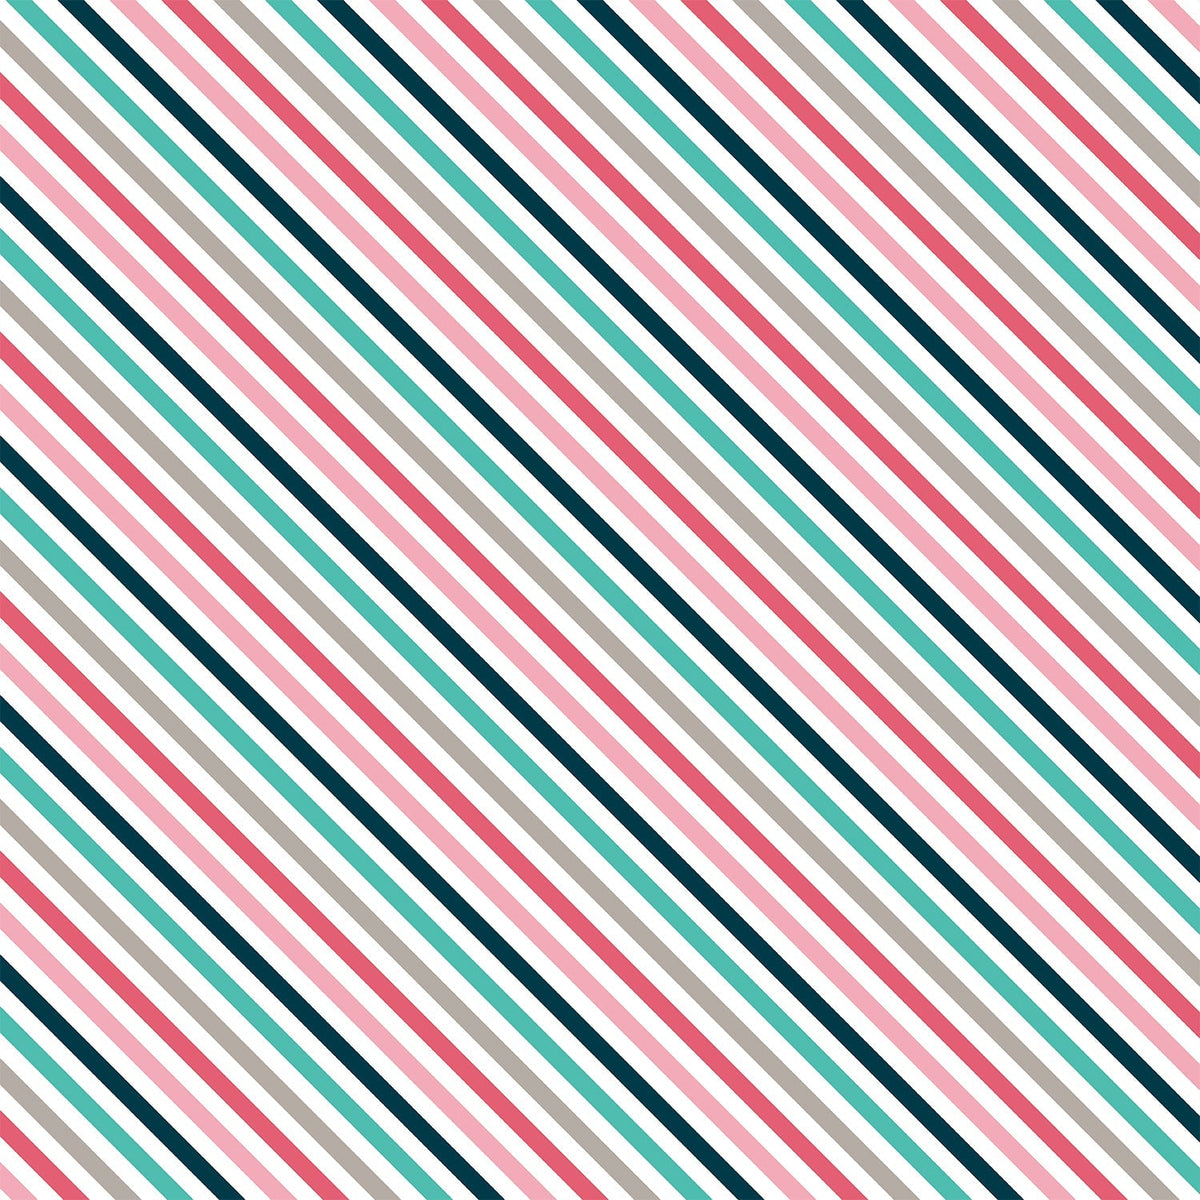 Red Diagonal Stripe Wrapping Paper